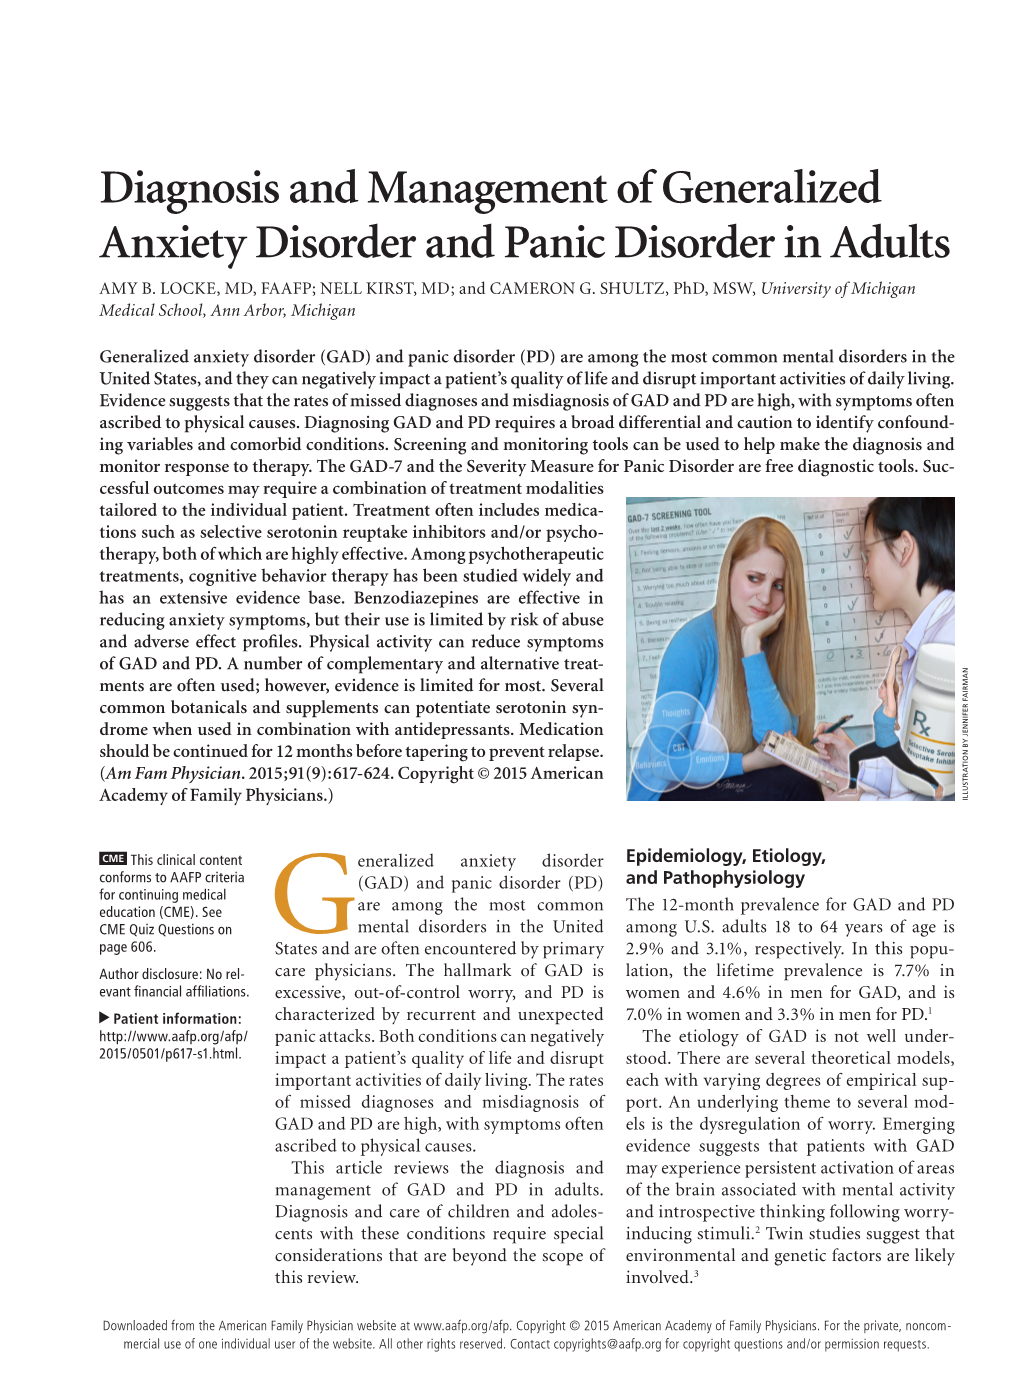 Diagnosis and Management of Generalized Anxiety Disorder and Panic Disorder in Adults AMY B